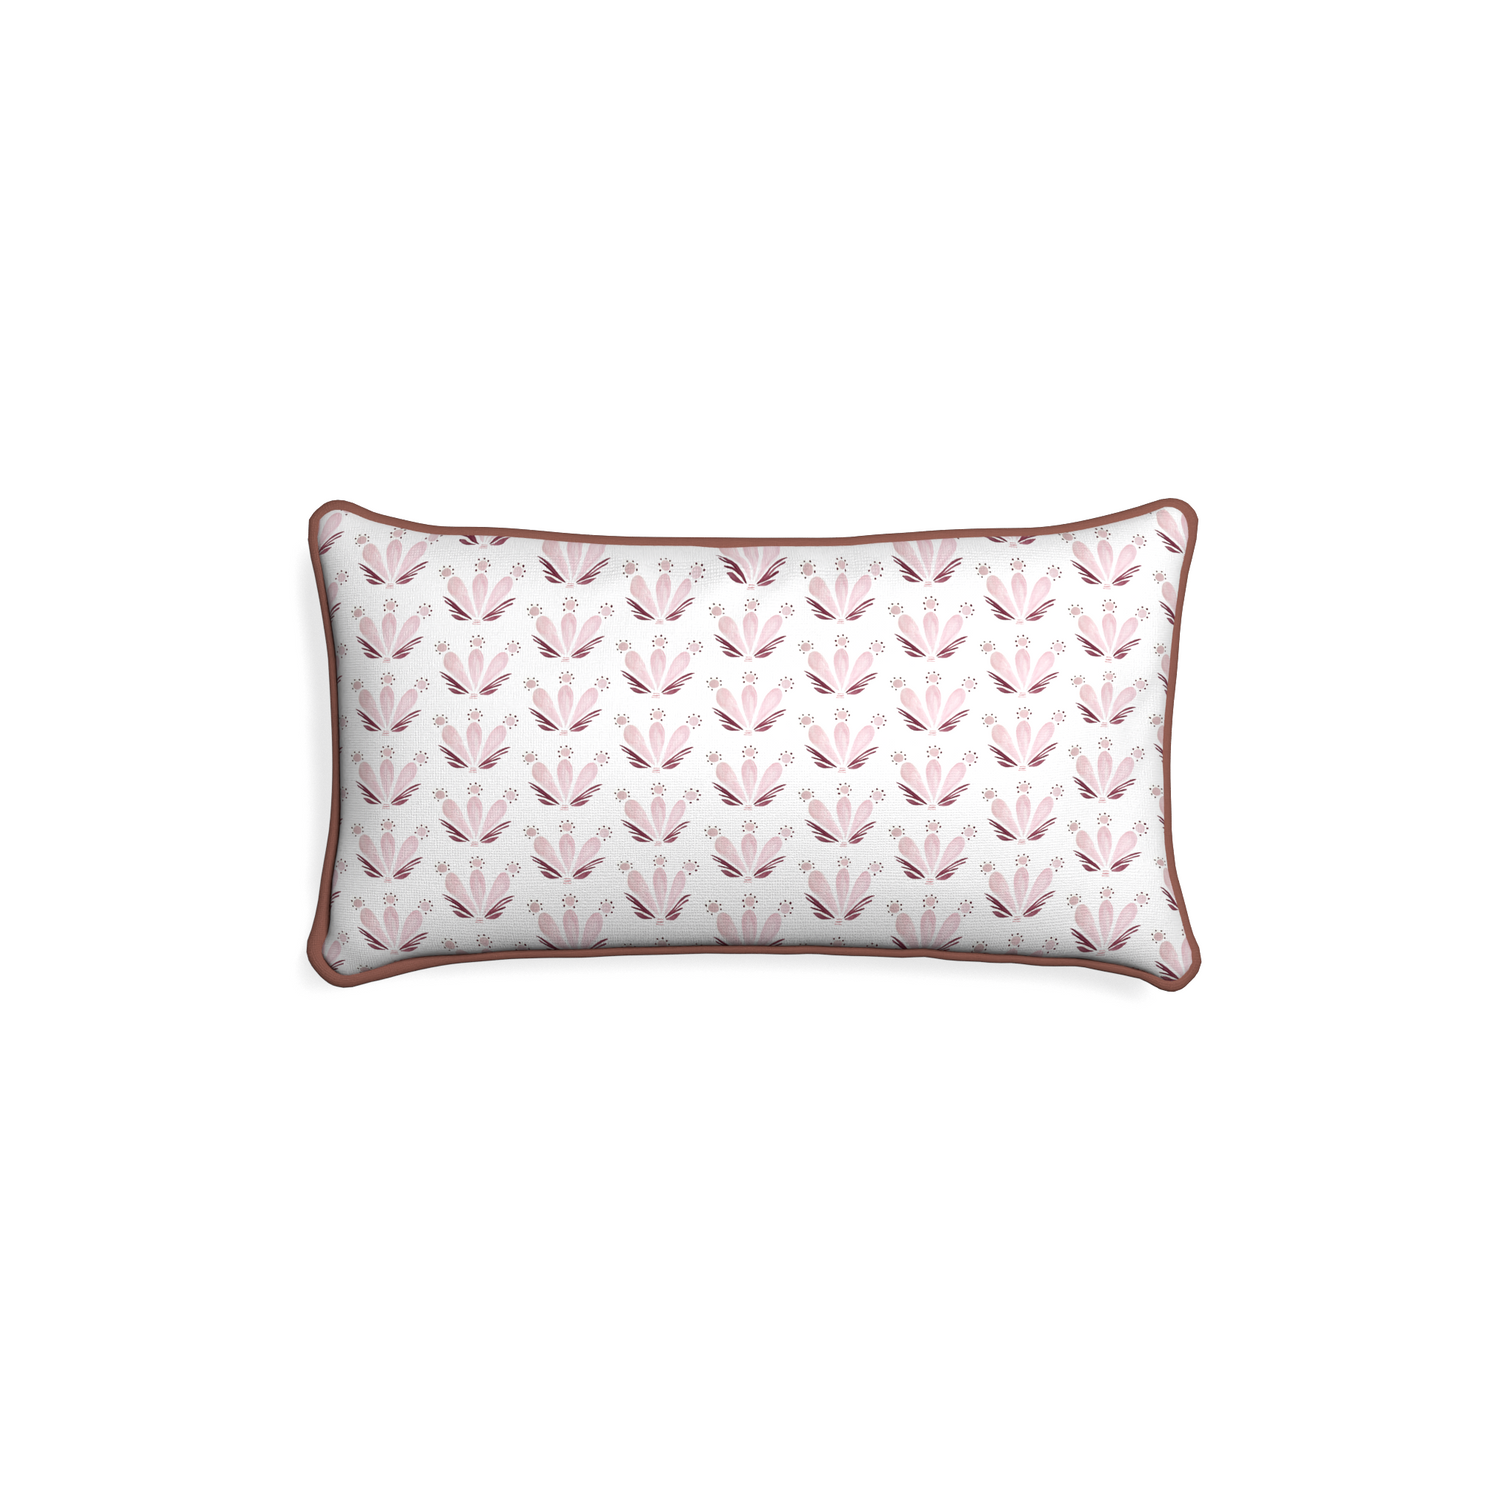 Petite-lumbar serena pink custom pink & burgundy drop repeat floralpillow with w piping on white background